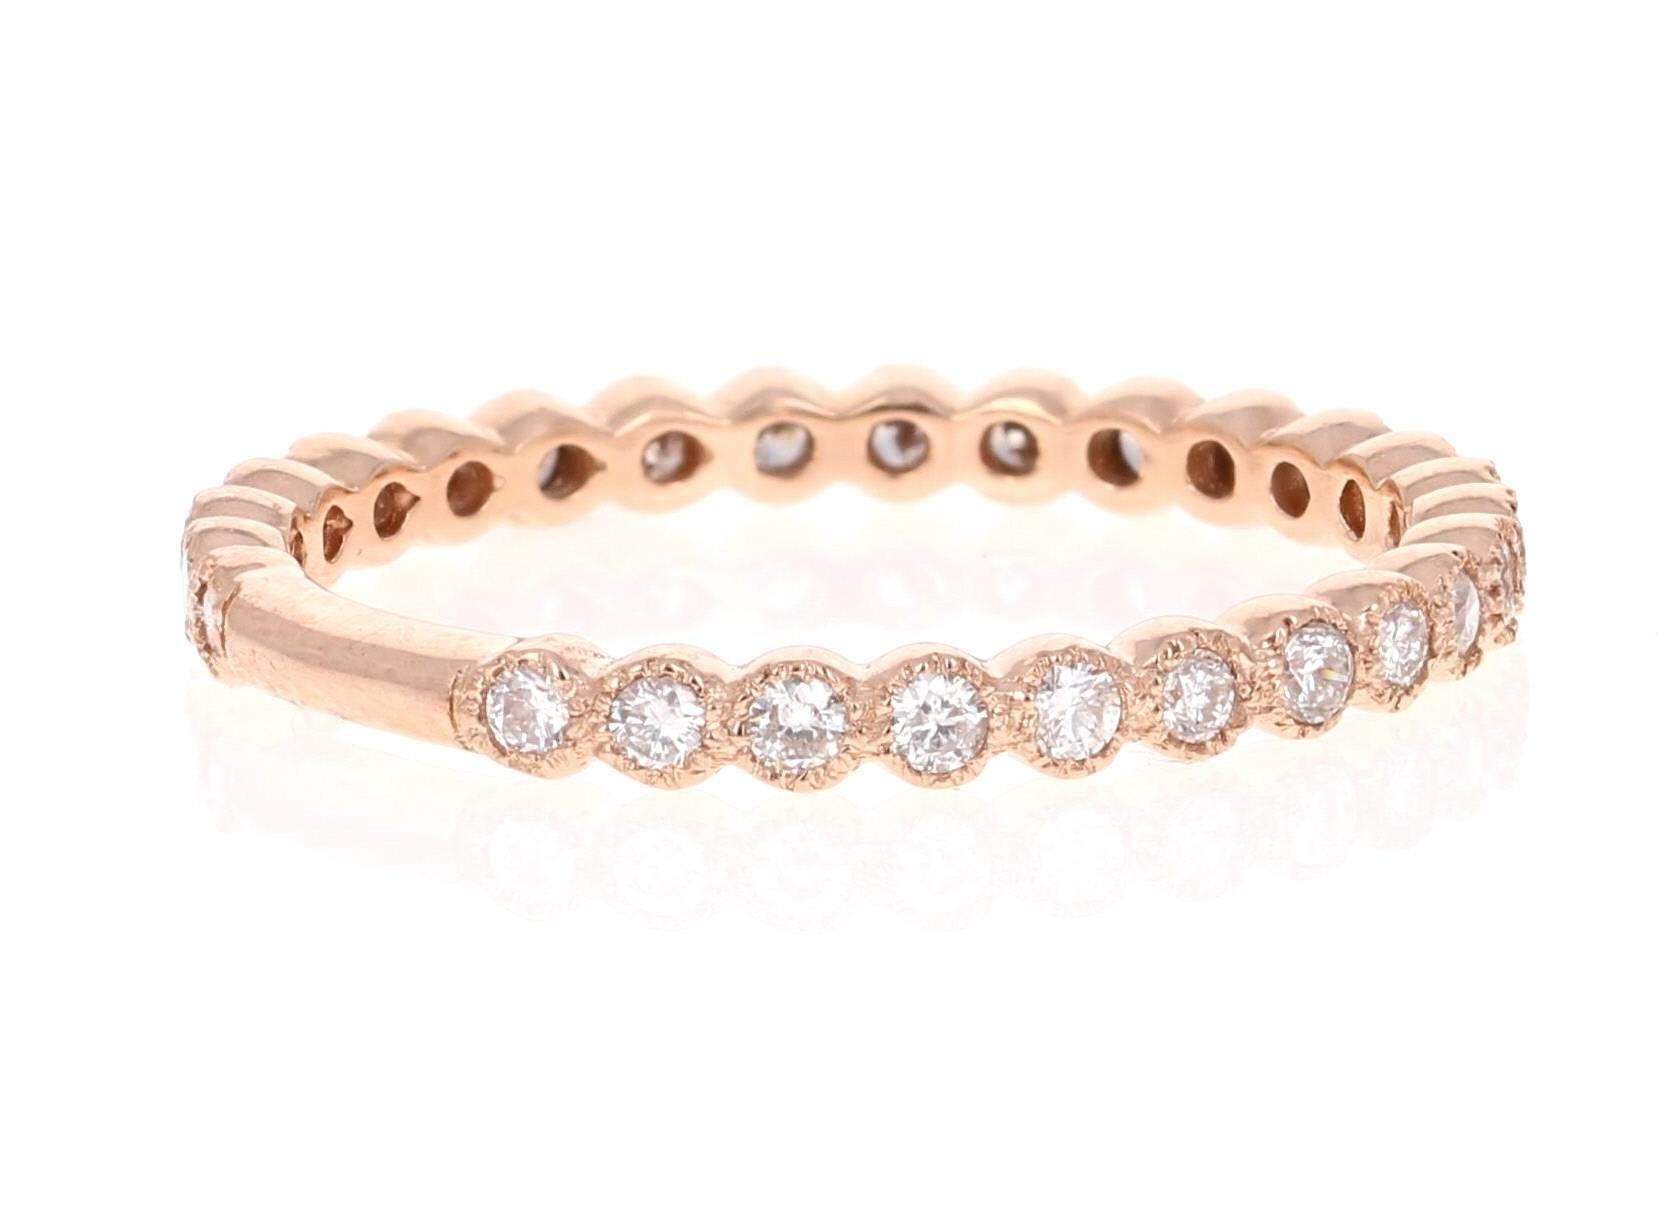 Cute and dainty 0.40 Carat Diamond band that is sure to be a great addition to anyone's accessory collection. There are 27 Round Cut Diamonds that weigh 0.40 carats. The total carat weight of the band is 0.40 carats. The band is made in 14K Rose